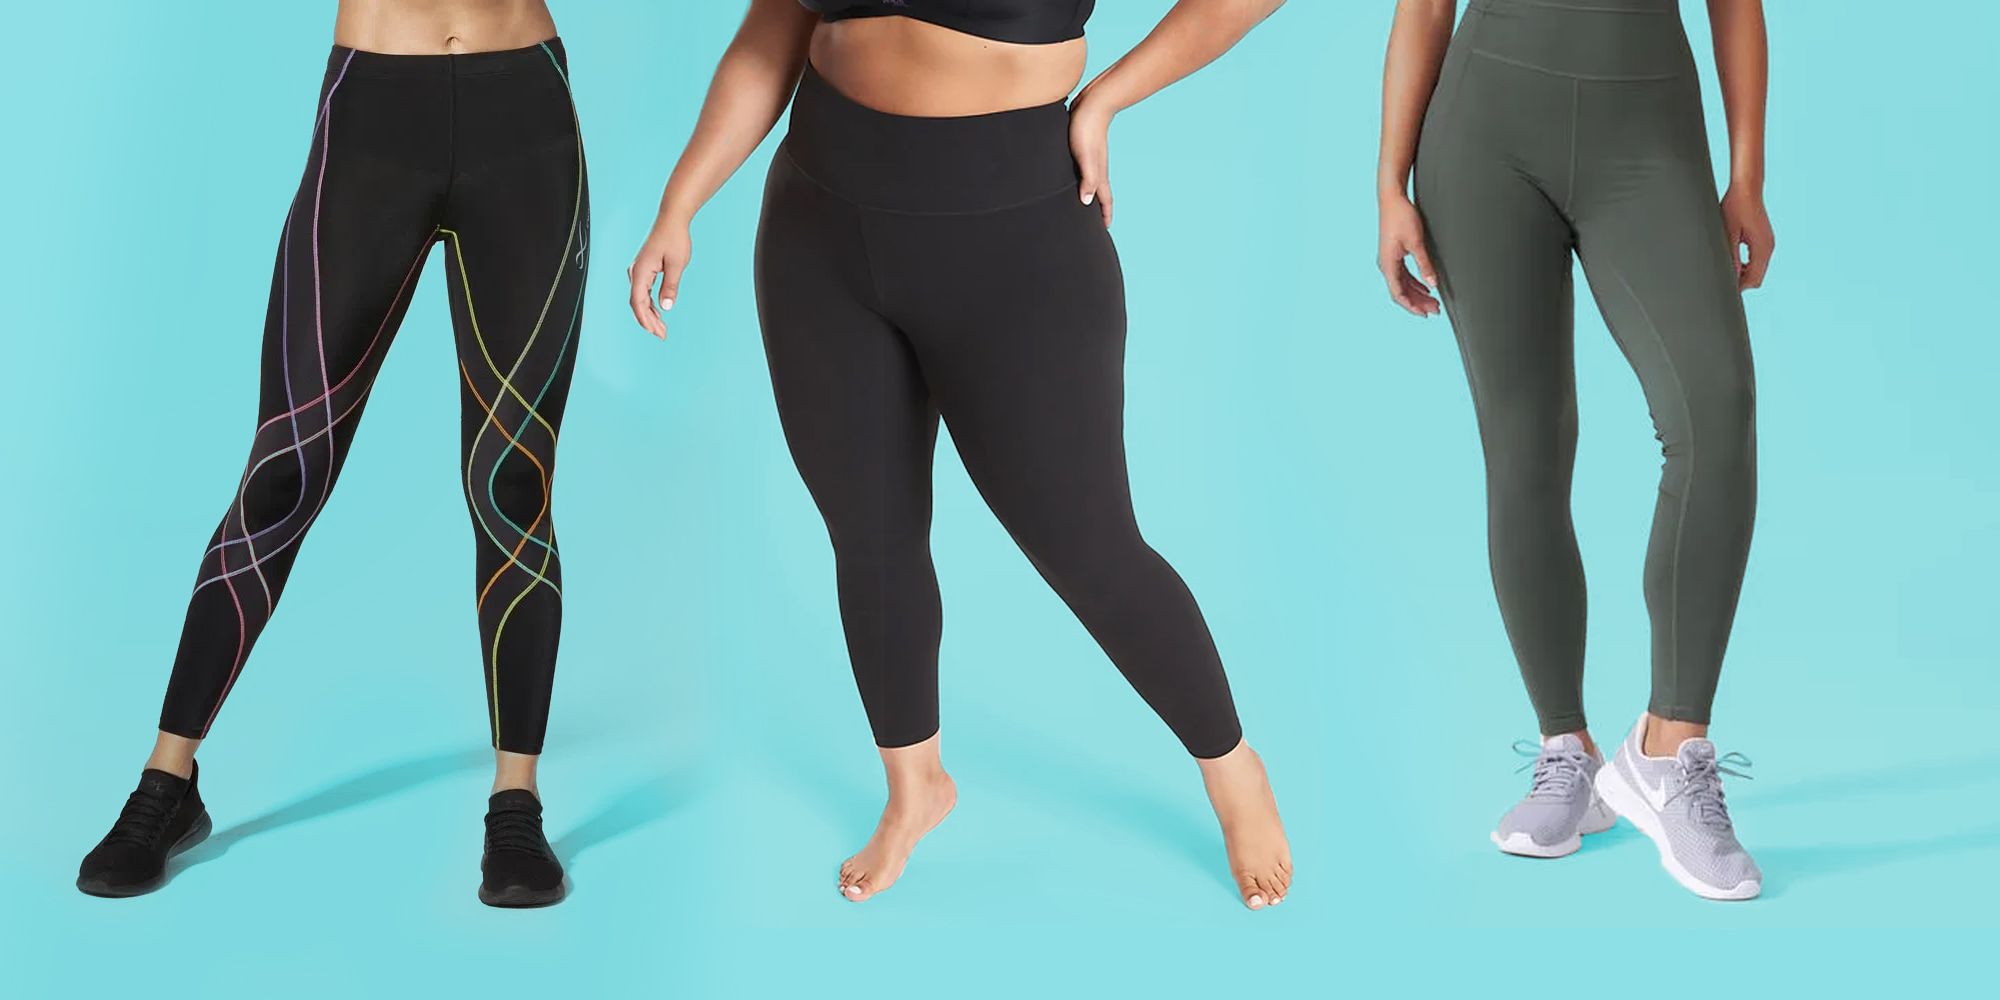 20 Cool Workout Clothes Thatll Kick Your Butt to Go to the Gym   Entertainment Tonight